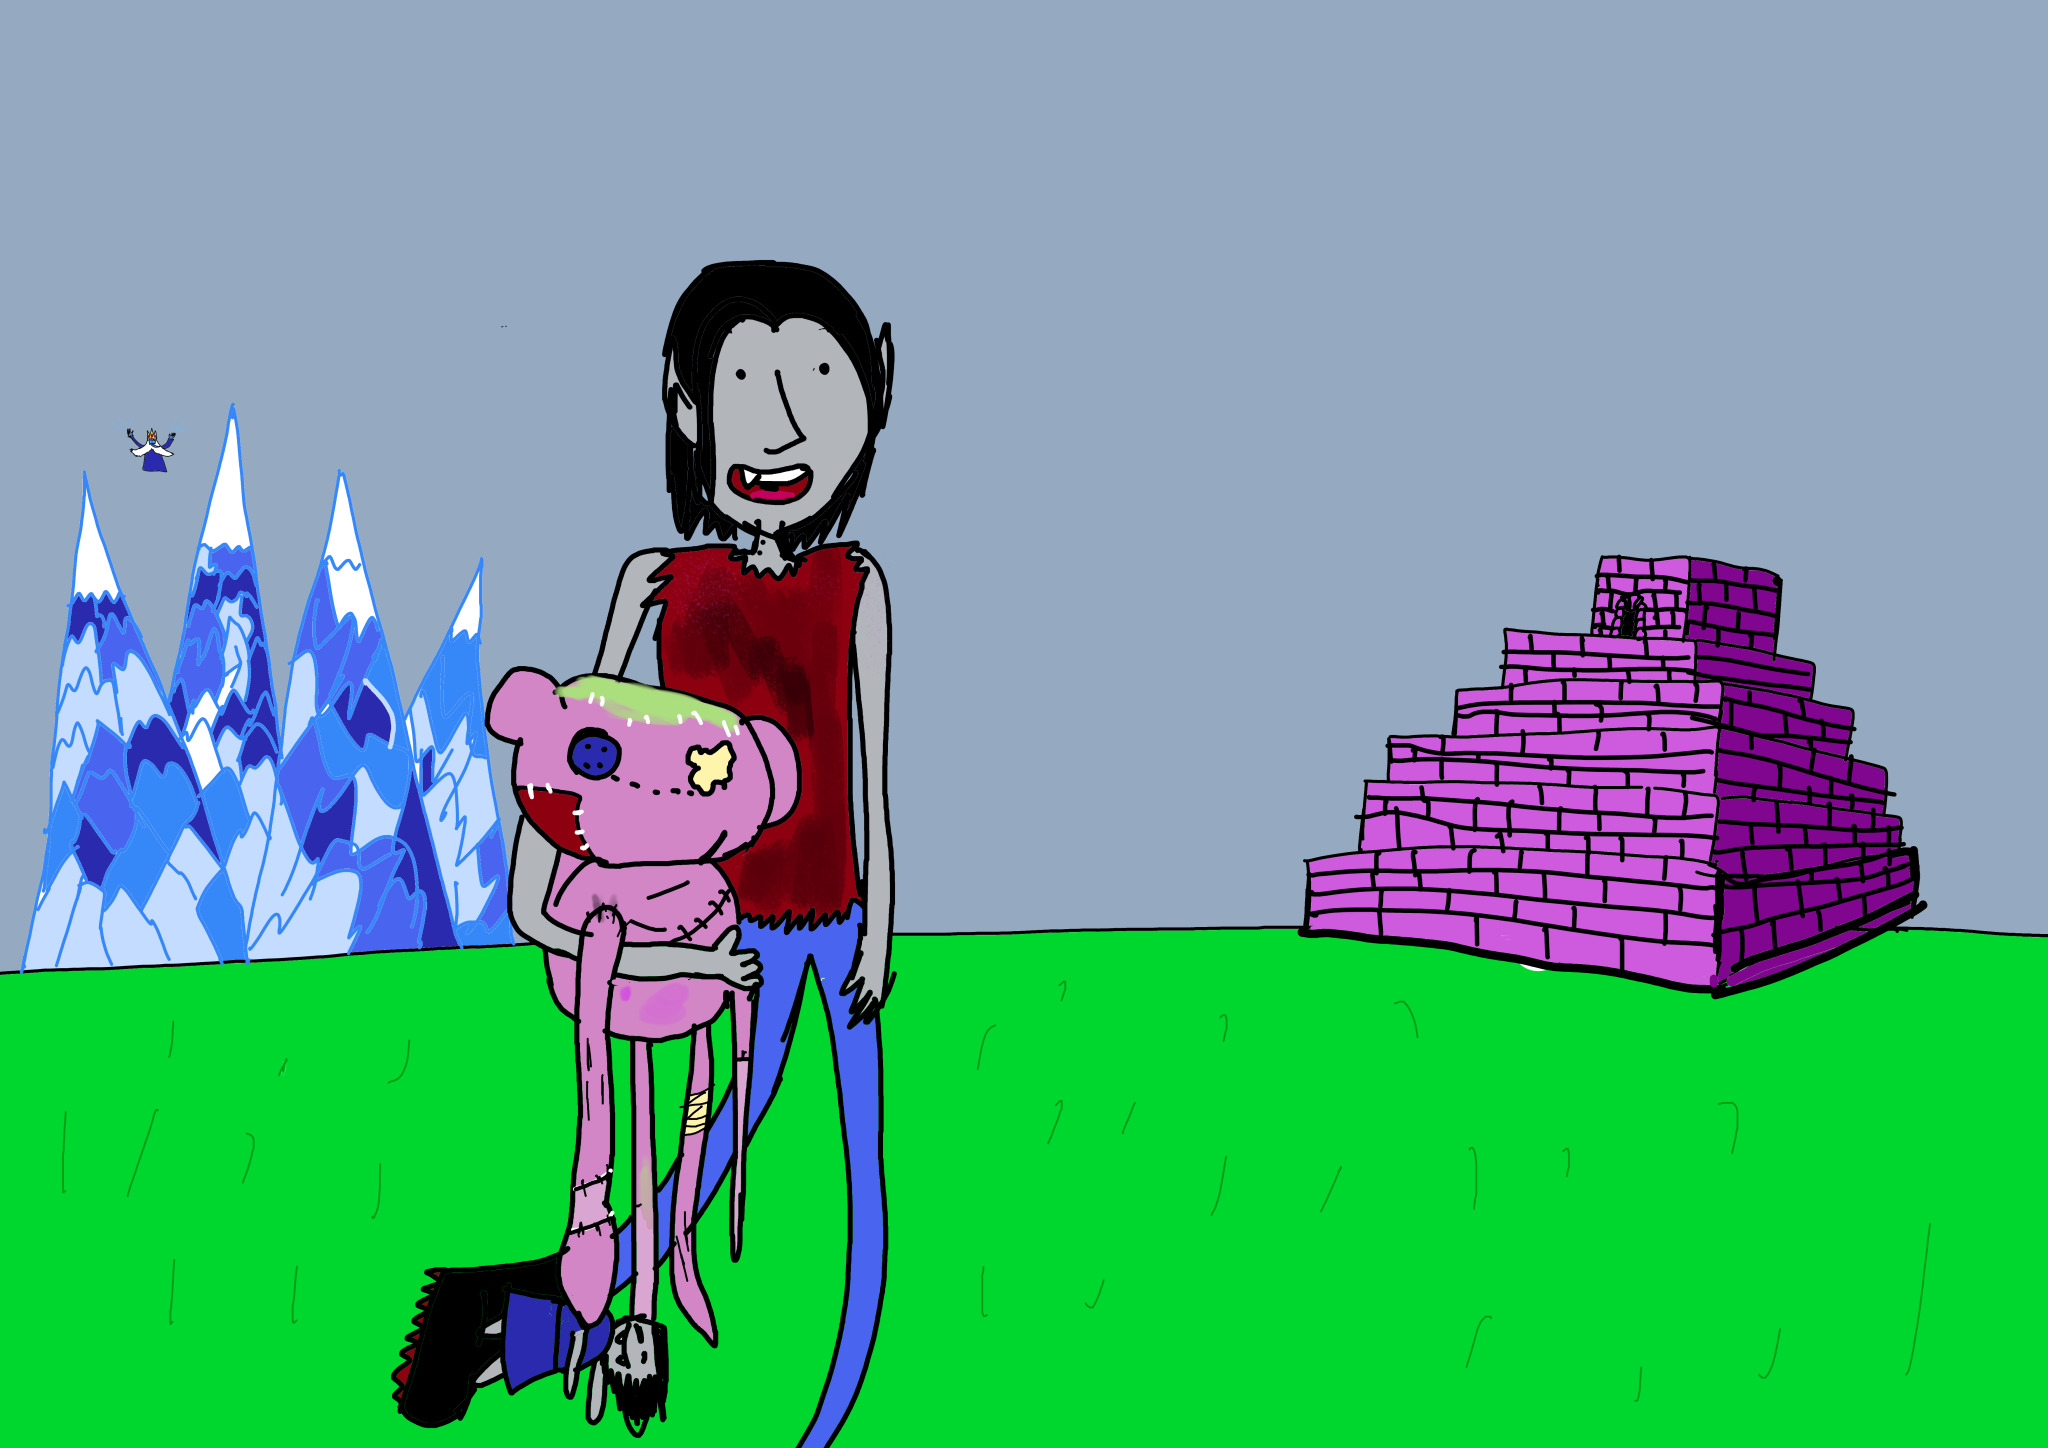 Marceline floating around OOod between the Ziggurat and the Ice Kingdom holding Hanbo holding a smaller marceline plushie.